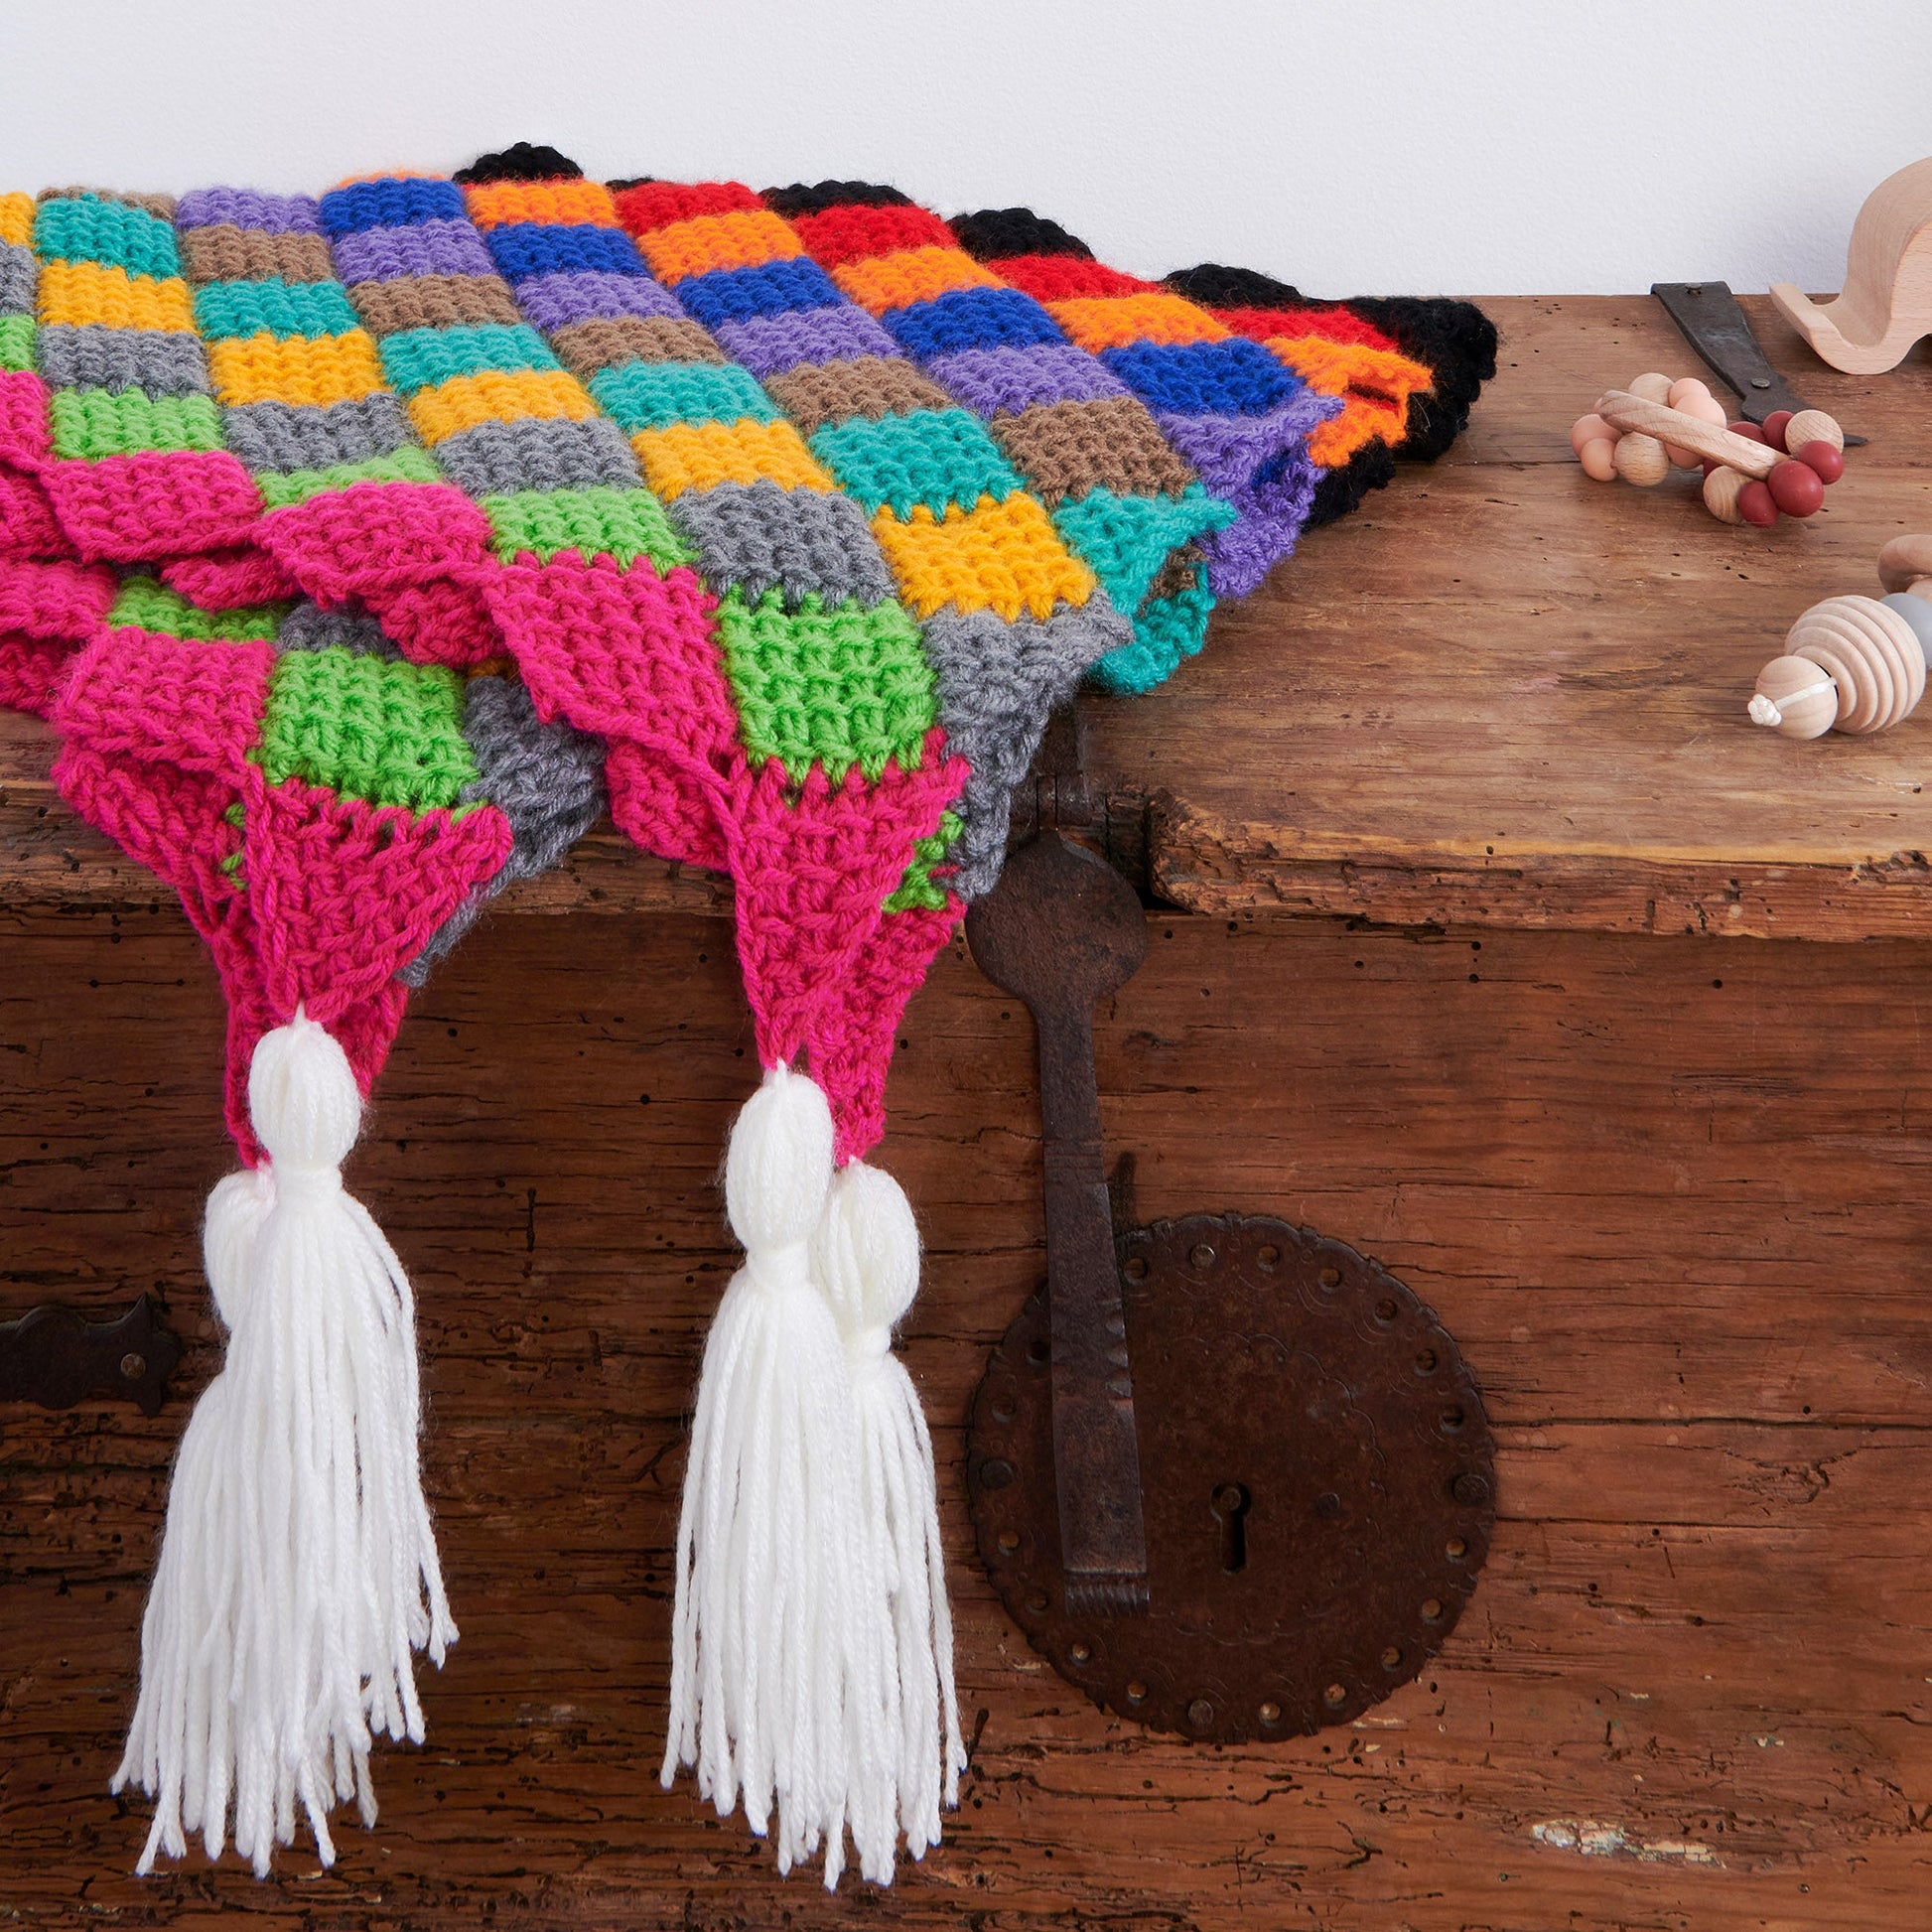 Can You Make A Baby Blanket With Tunisian Crochet? - Make It Crochet